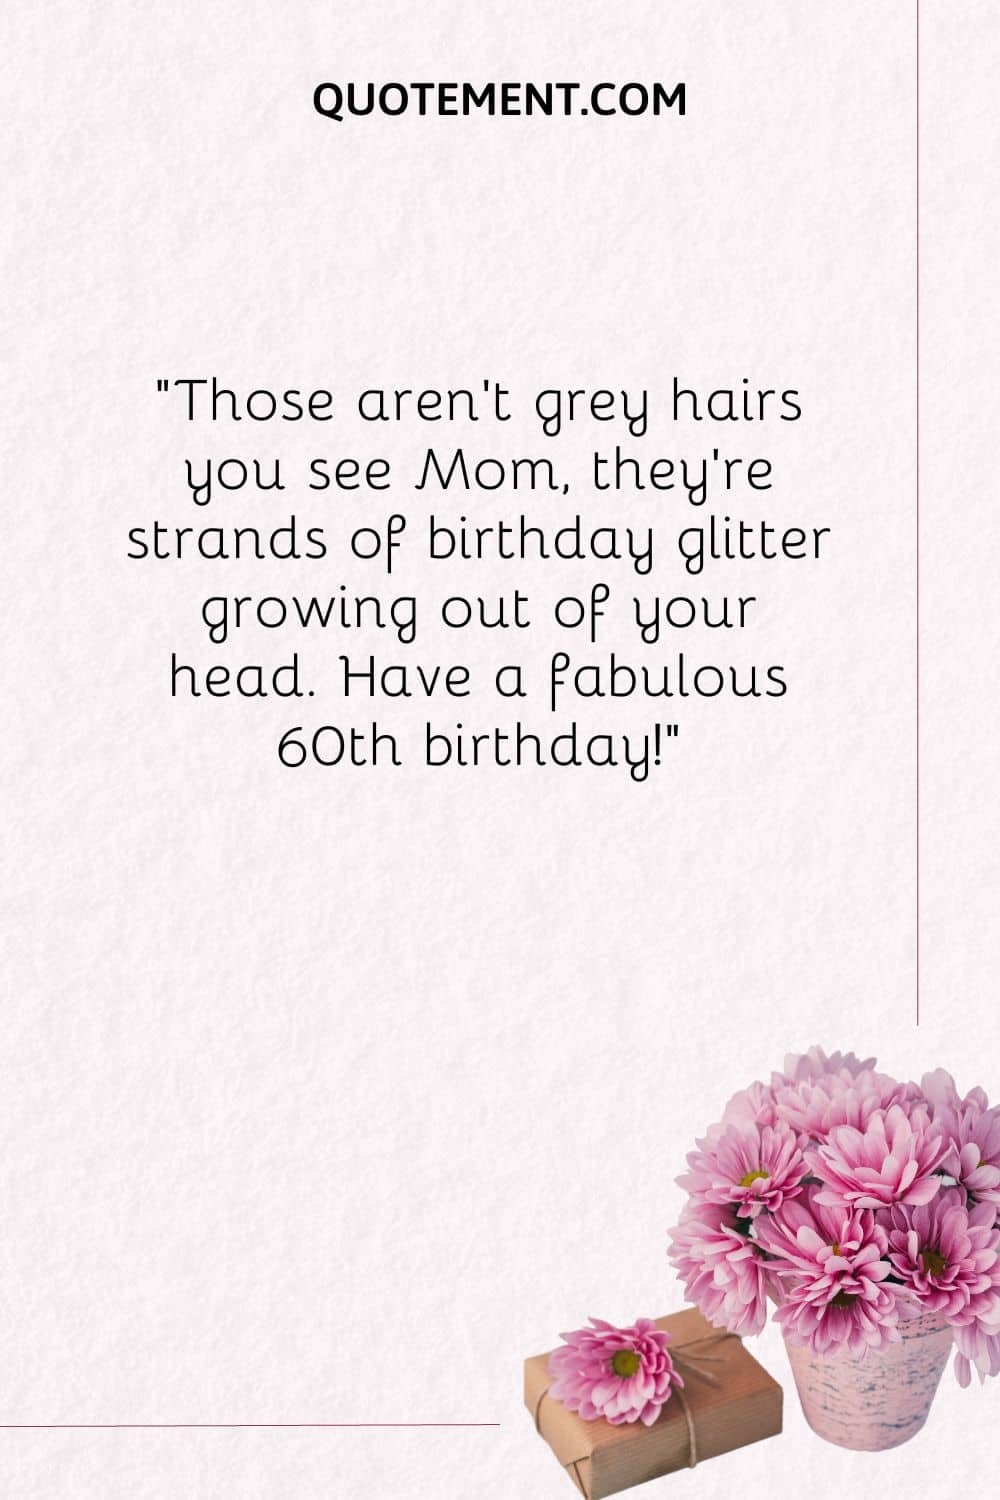 Those aren't grey hairs you see Mom, they're strands of birthday glitter growing out of your head